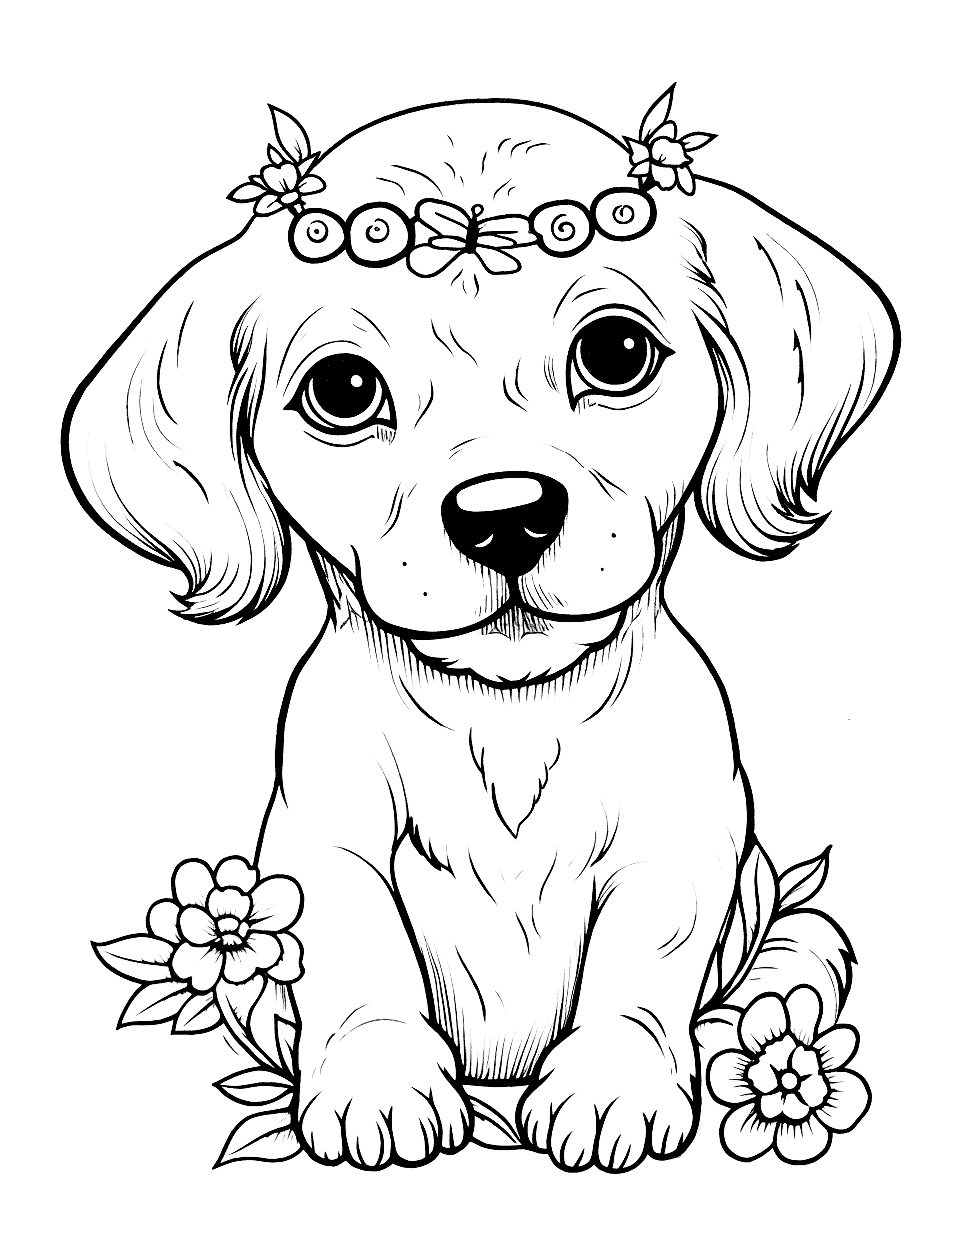 Puppy With a Flower Crown Cute Coloring Page - A sweet puppy wearing a crown made of colorful flowers.